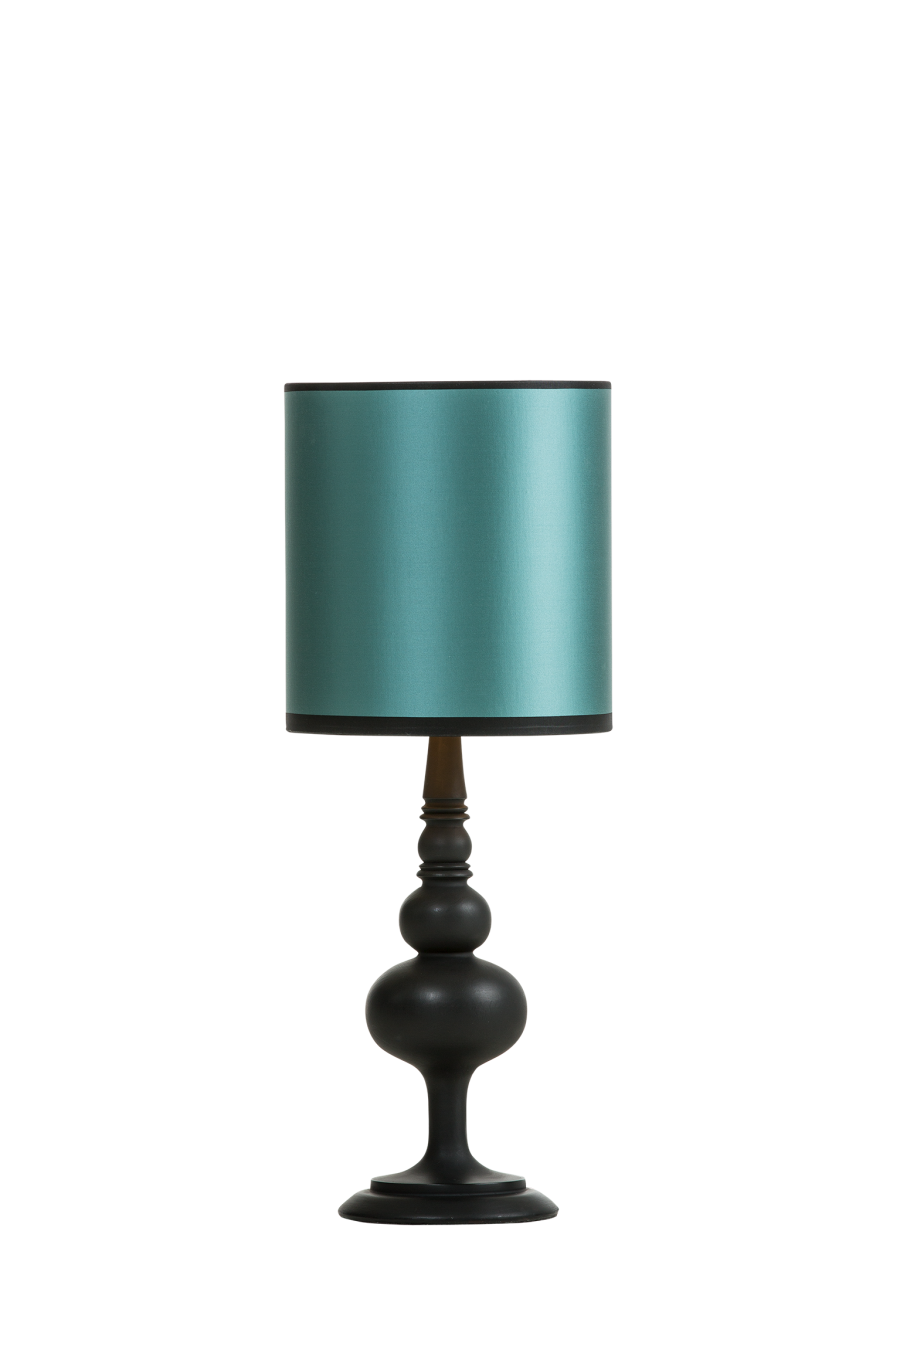 Allround table lamp